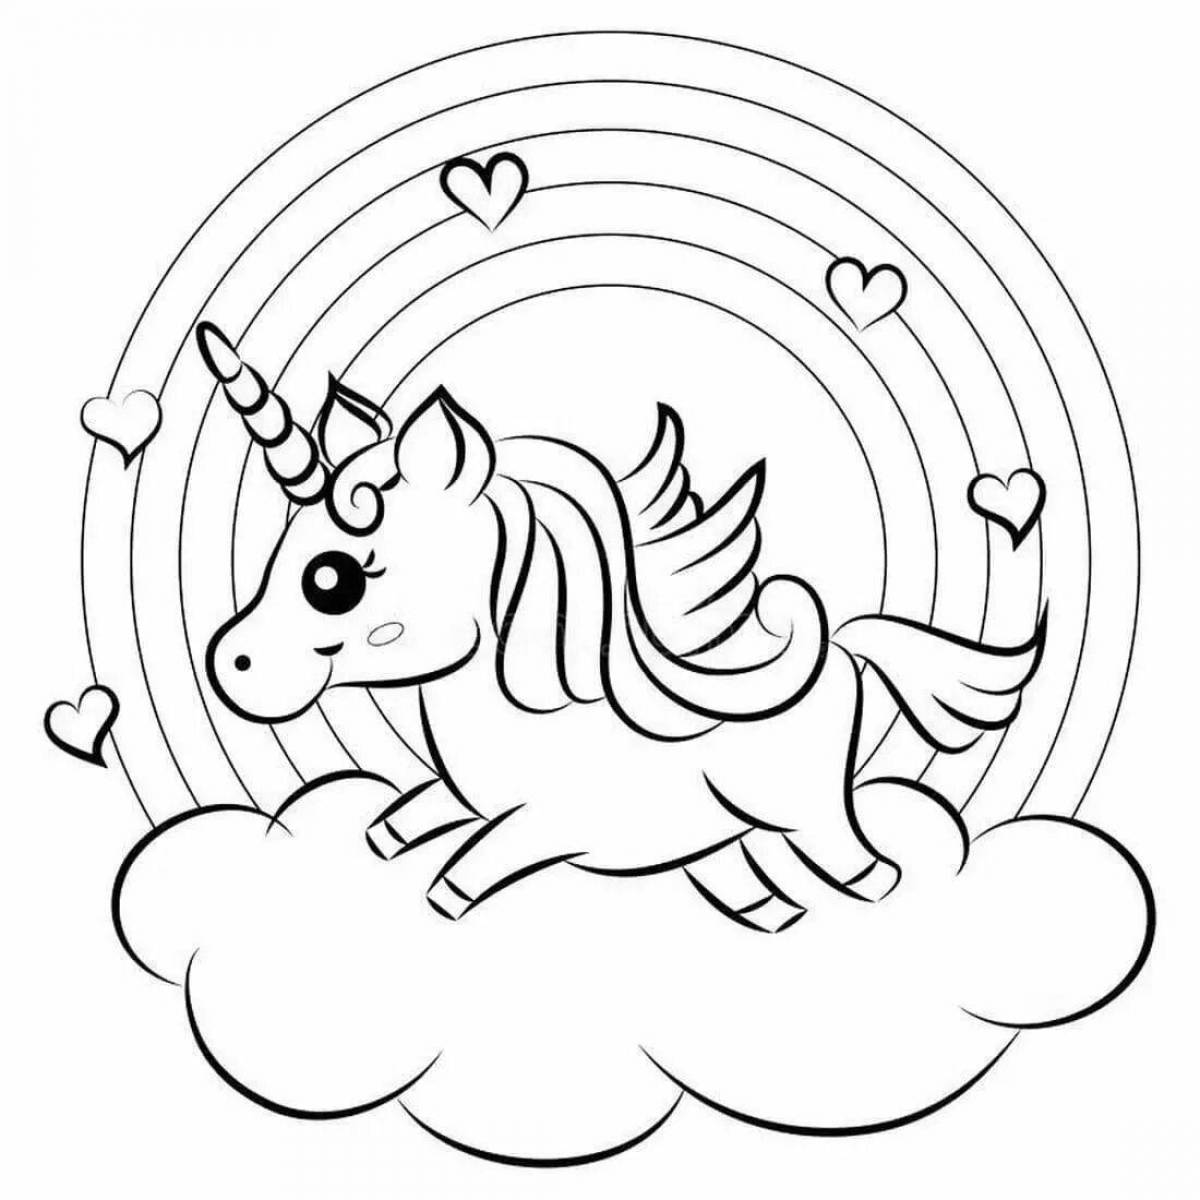 Sparkling unicorn coloring book for kids